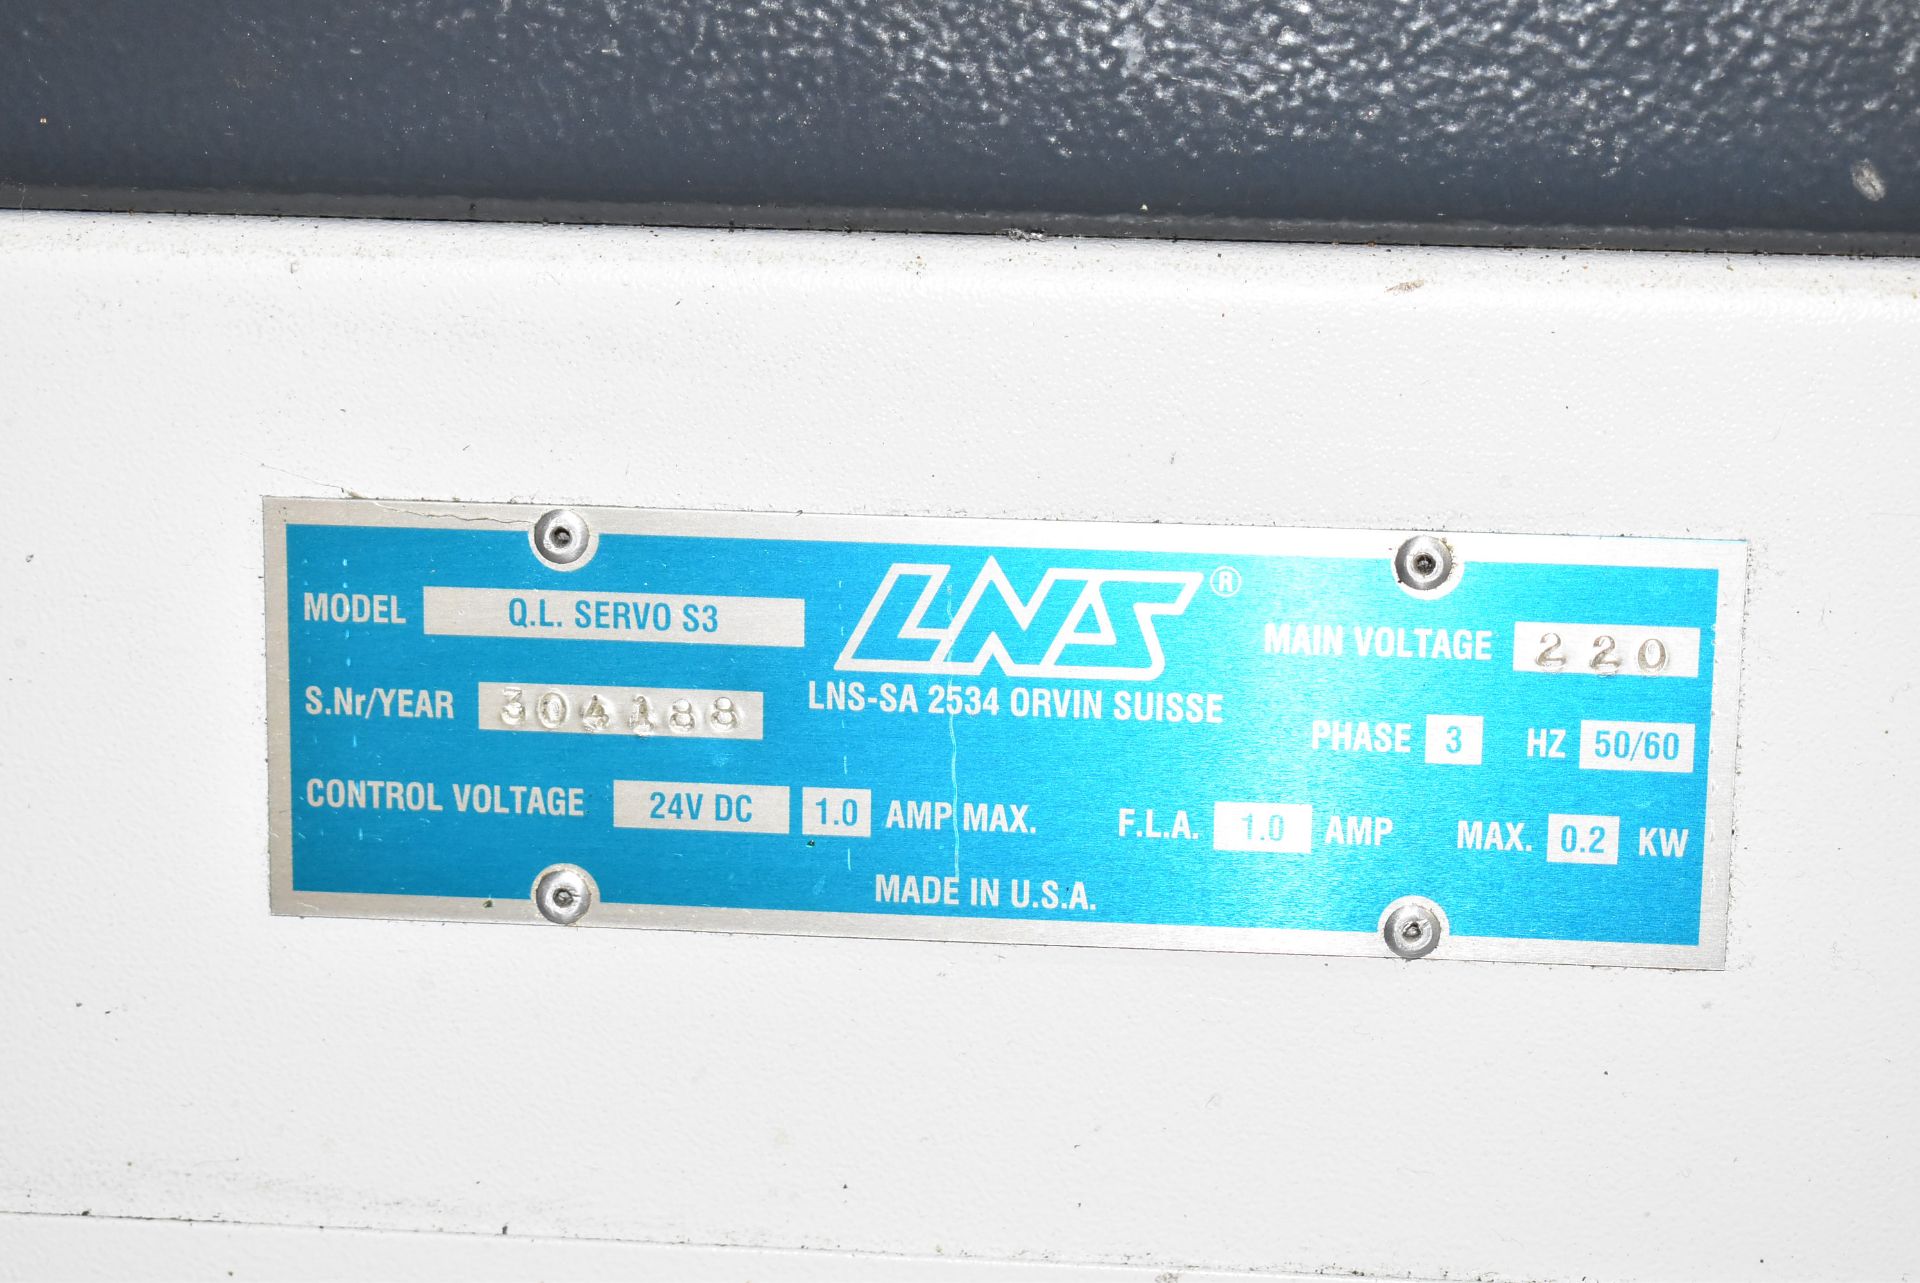 LNS Q.L. SERVO S3 BAR FEEDER, 220V/3PH/50-60HZ, S/N 304188 (CI) [RIGGING FEE FOR LOT #42 - $500 - Image 3 of 4